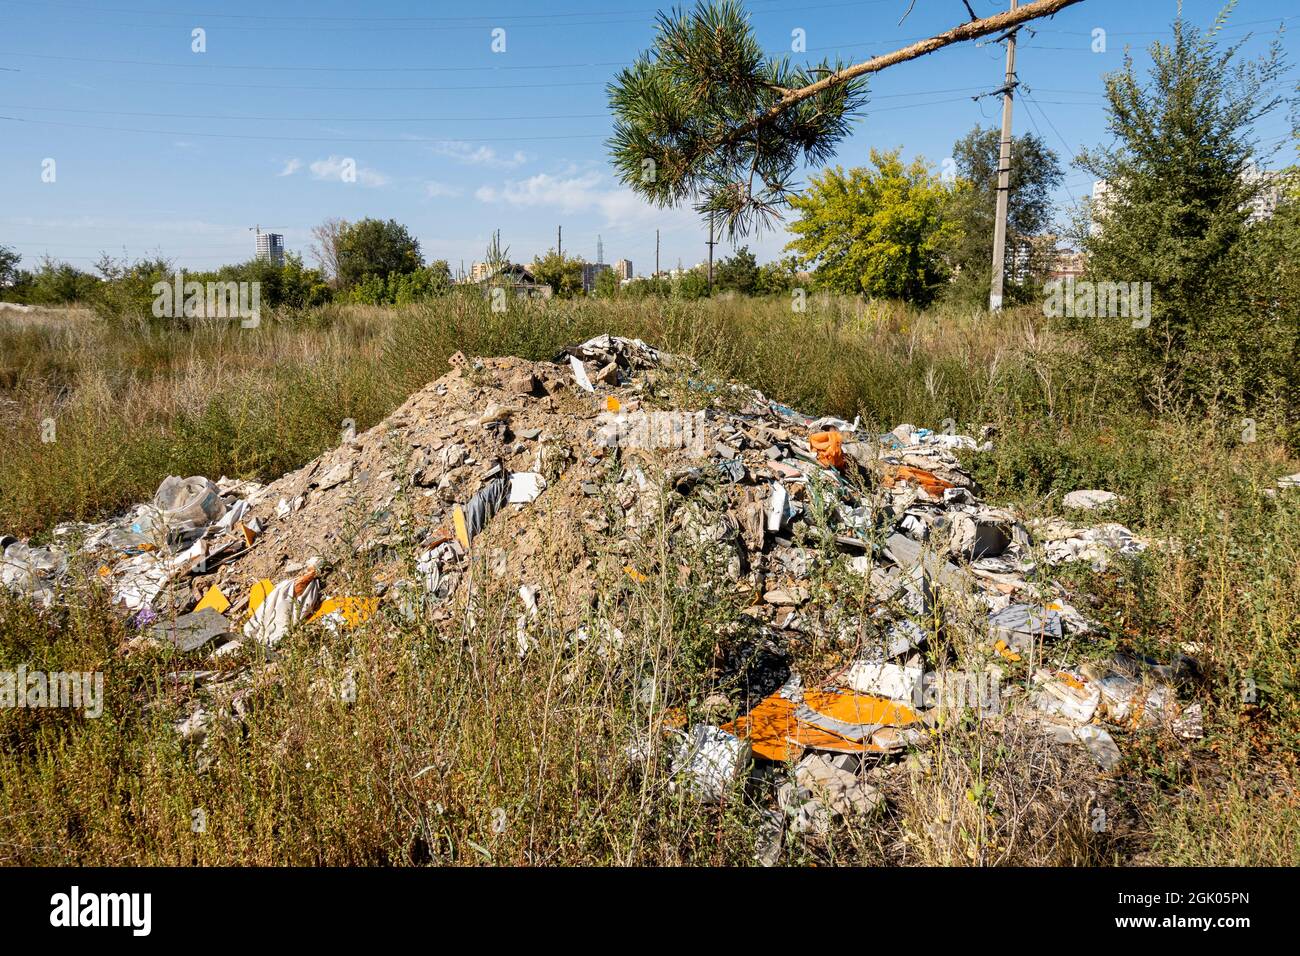 Сonstruction waste dumped in the developing area of city- concept: ecology, environment and pollution; Nur-Sultan, Kazakhstan, Central Asia Stock Photo